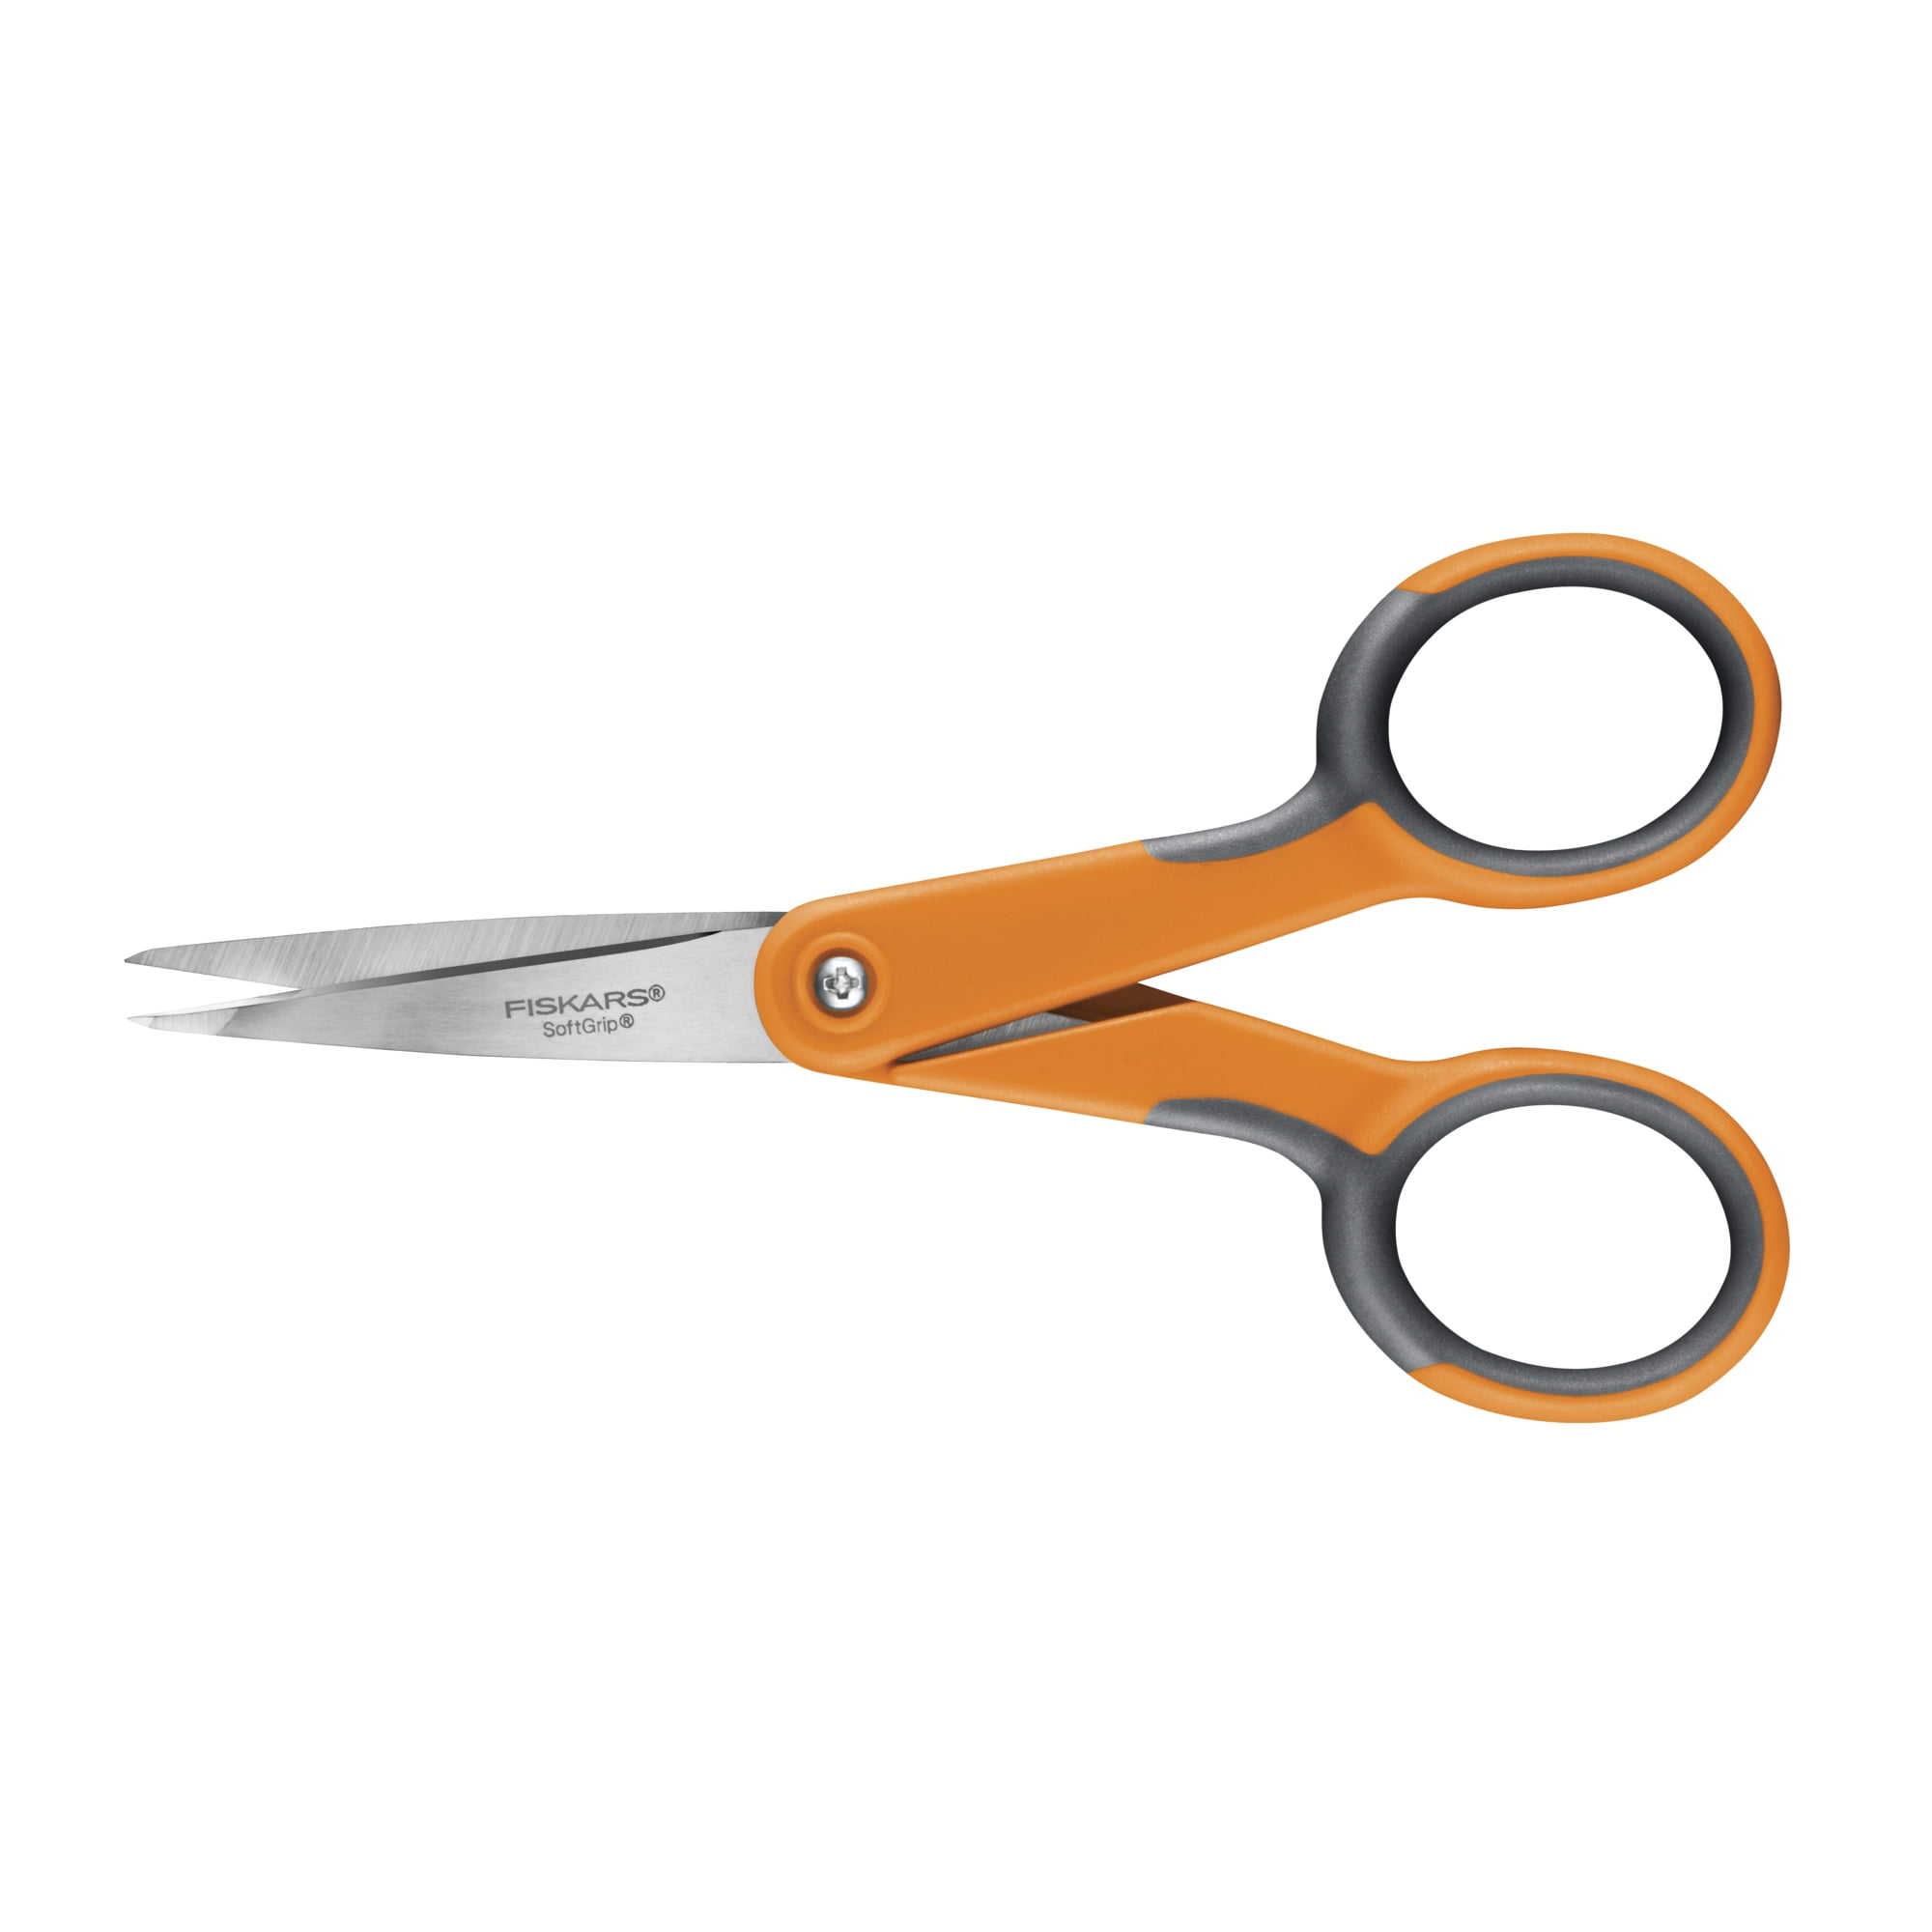 Valor Products 5-Inch Soft Grip Stainless Steel Safety Scissors Bulk Set